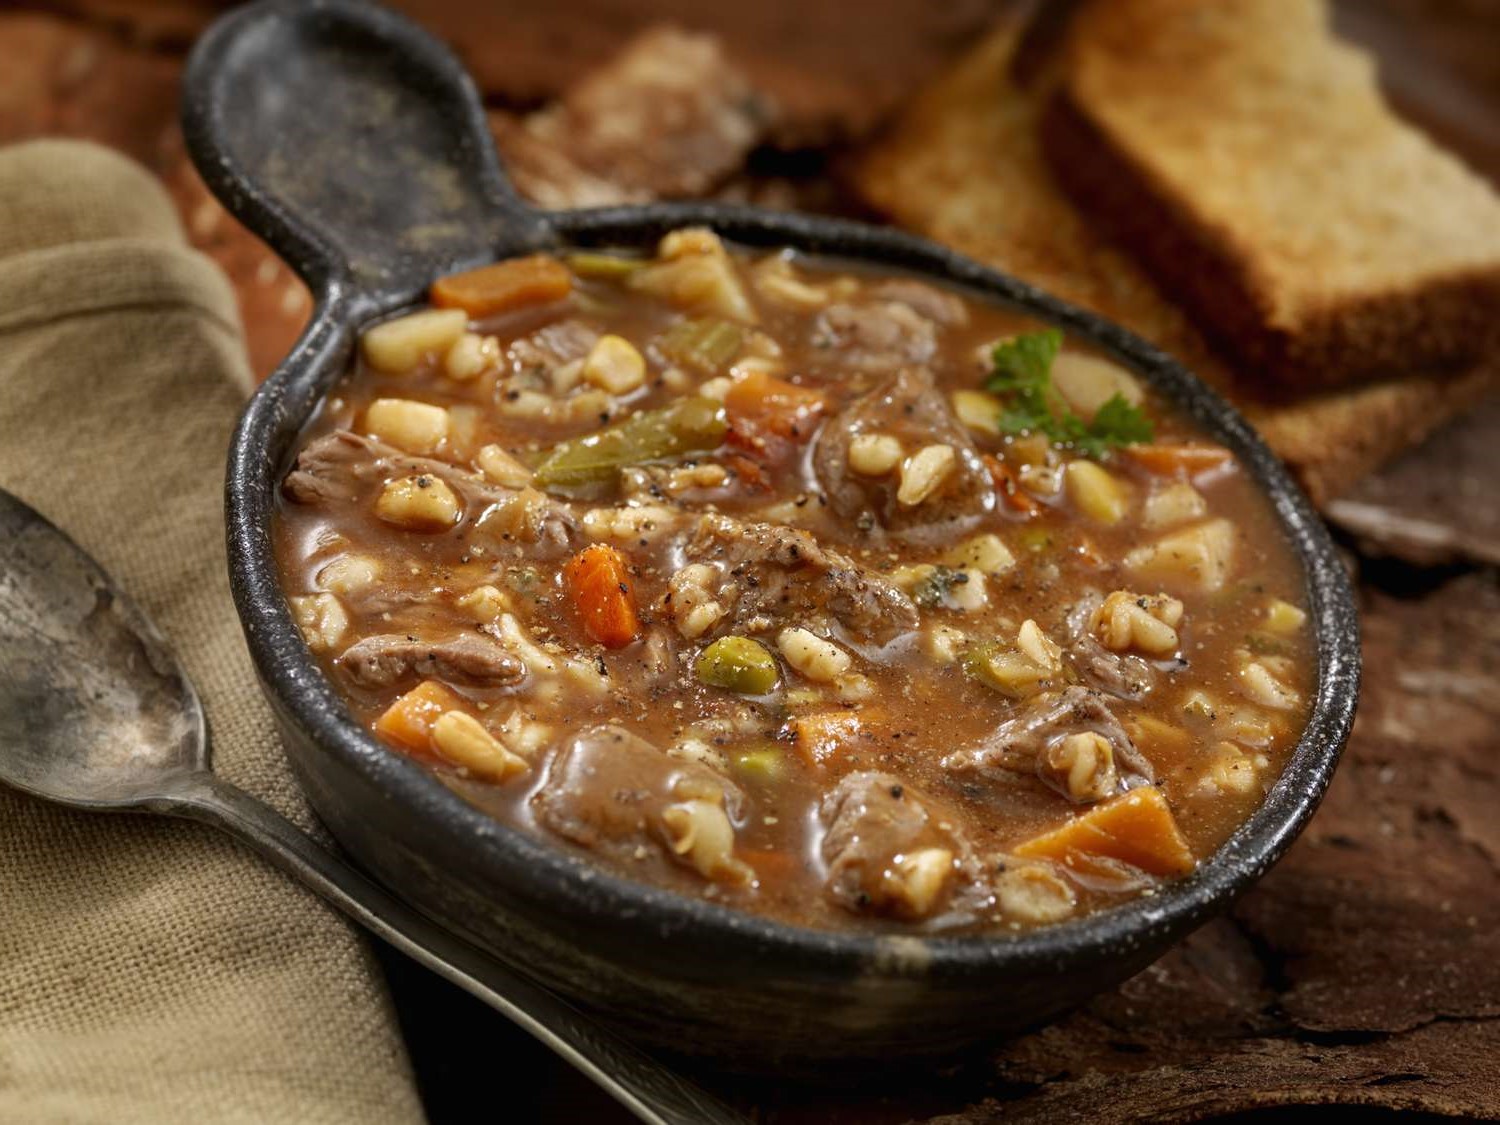 Rustic Beef and Barley Soup Recipe